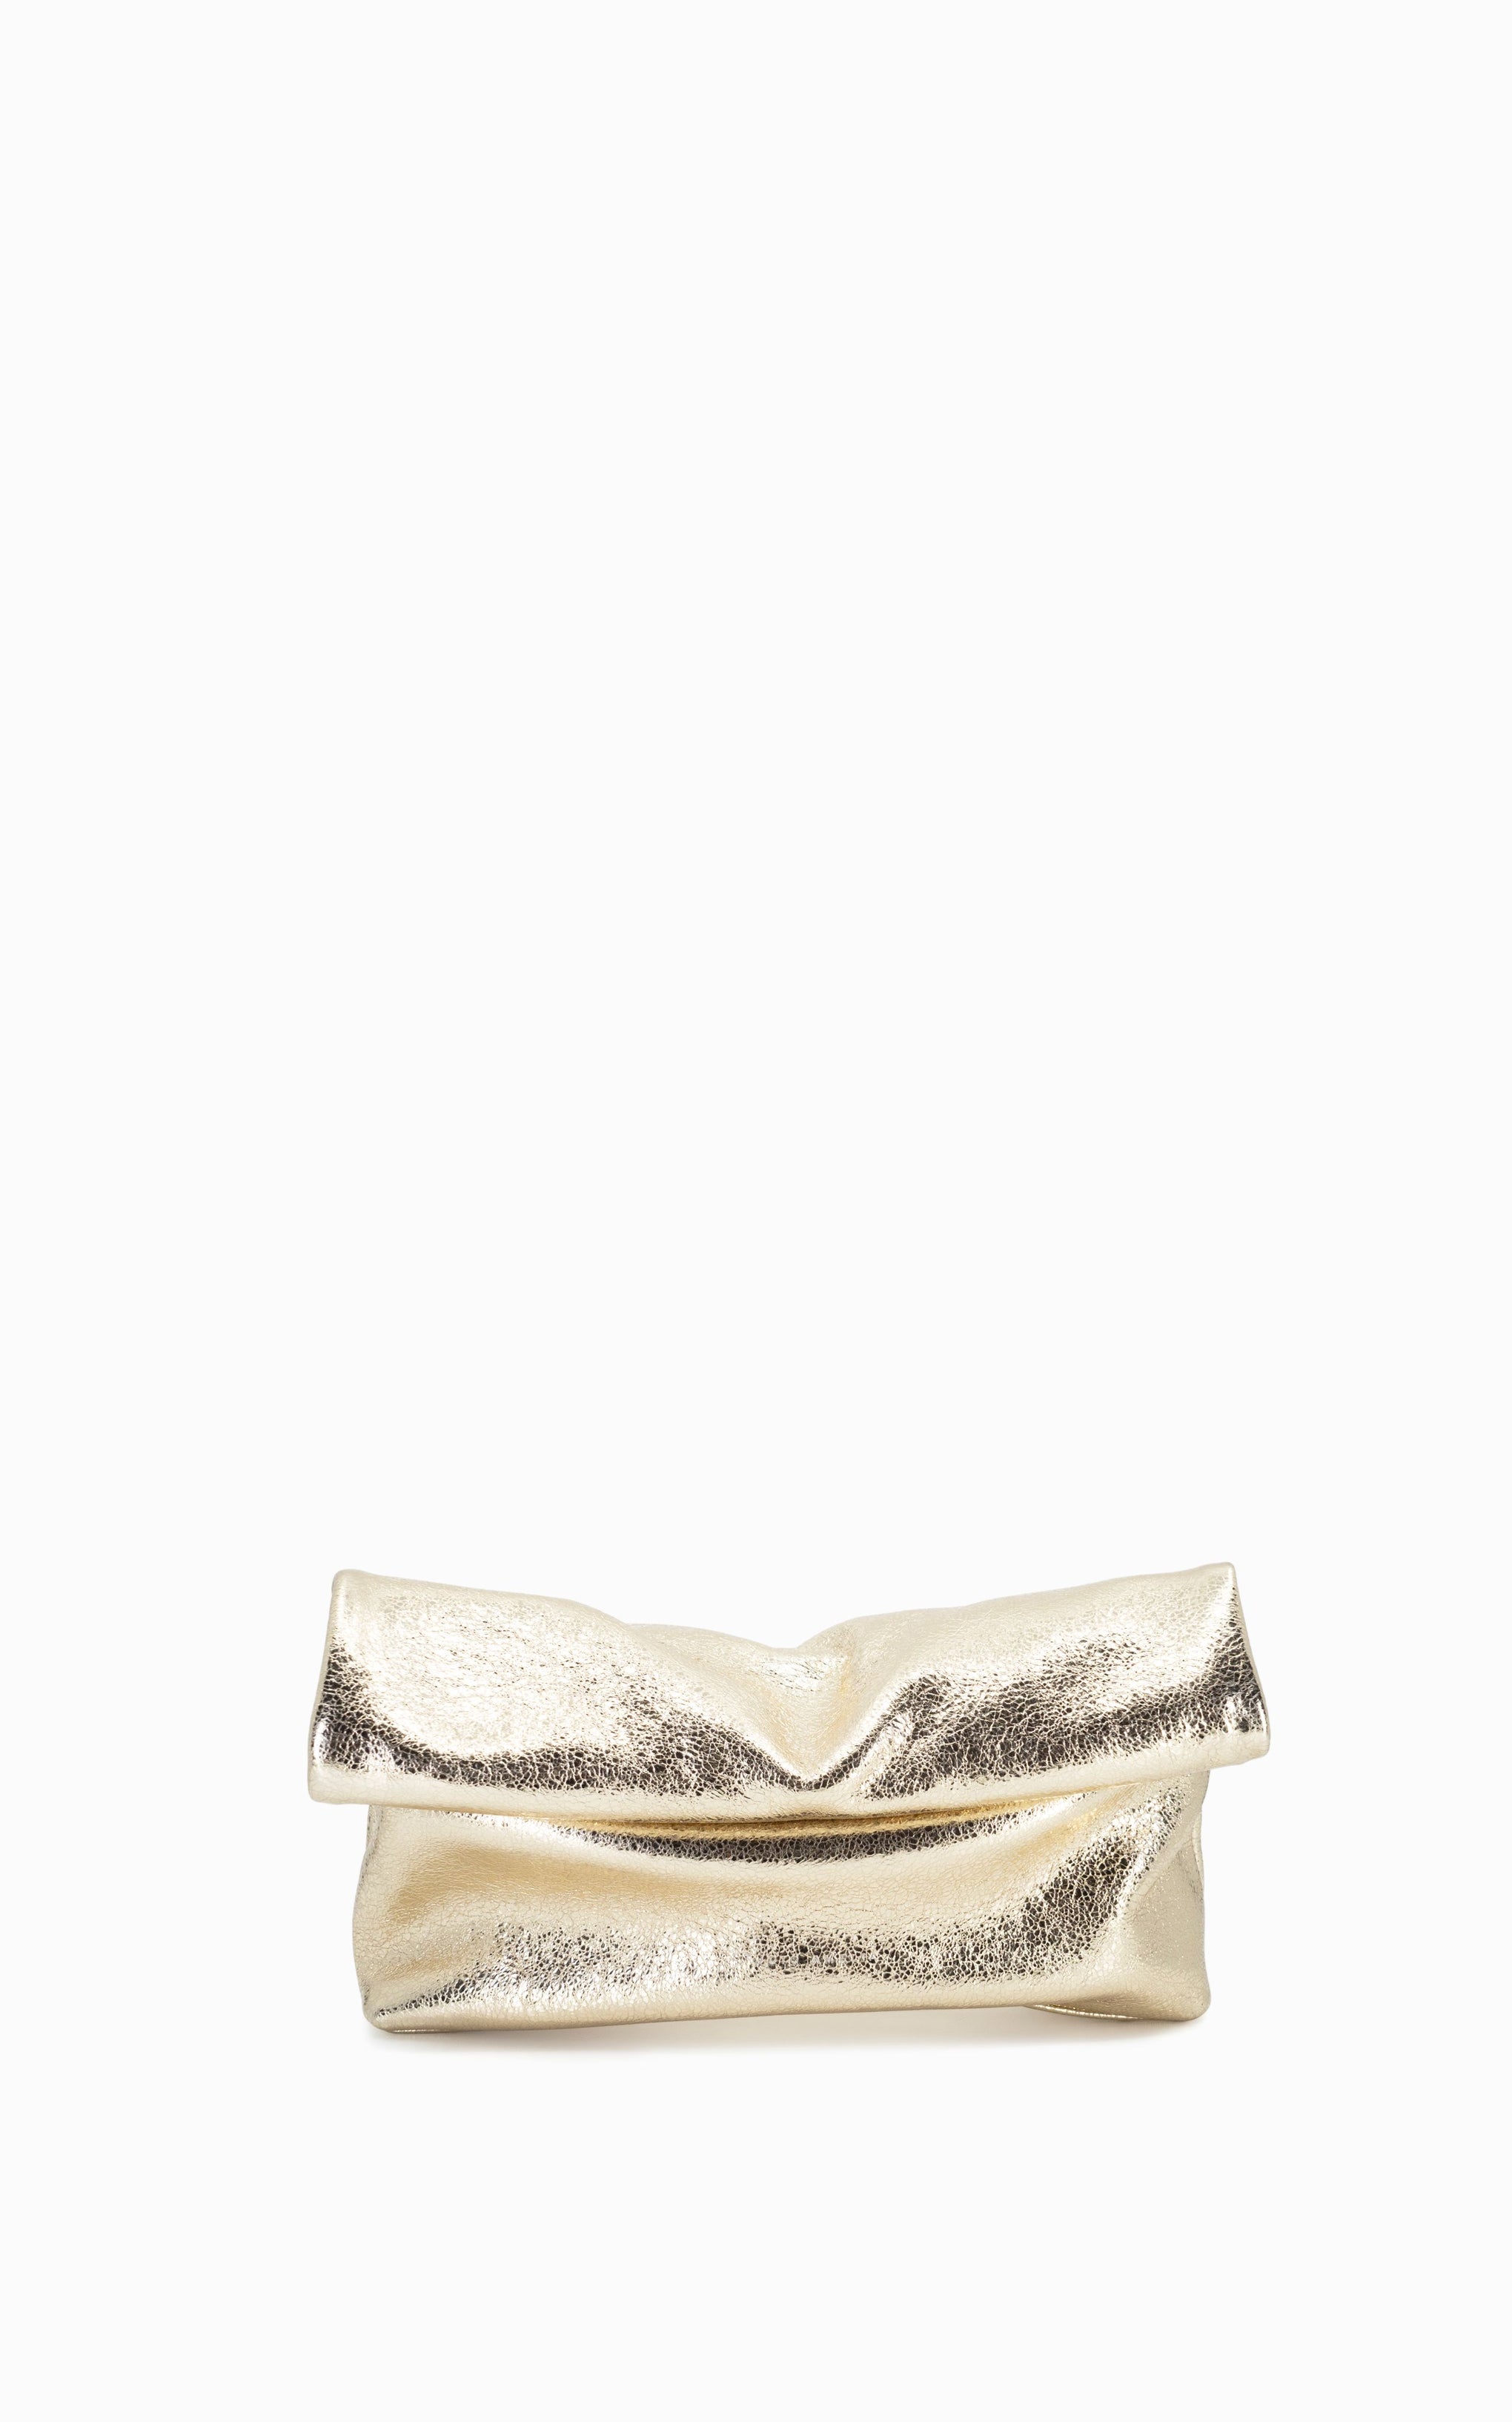 The Studio Amelia Pillow Clutch in Gold available at The New Trend Australia